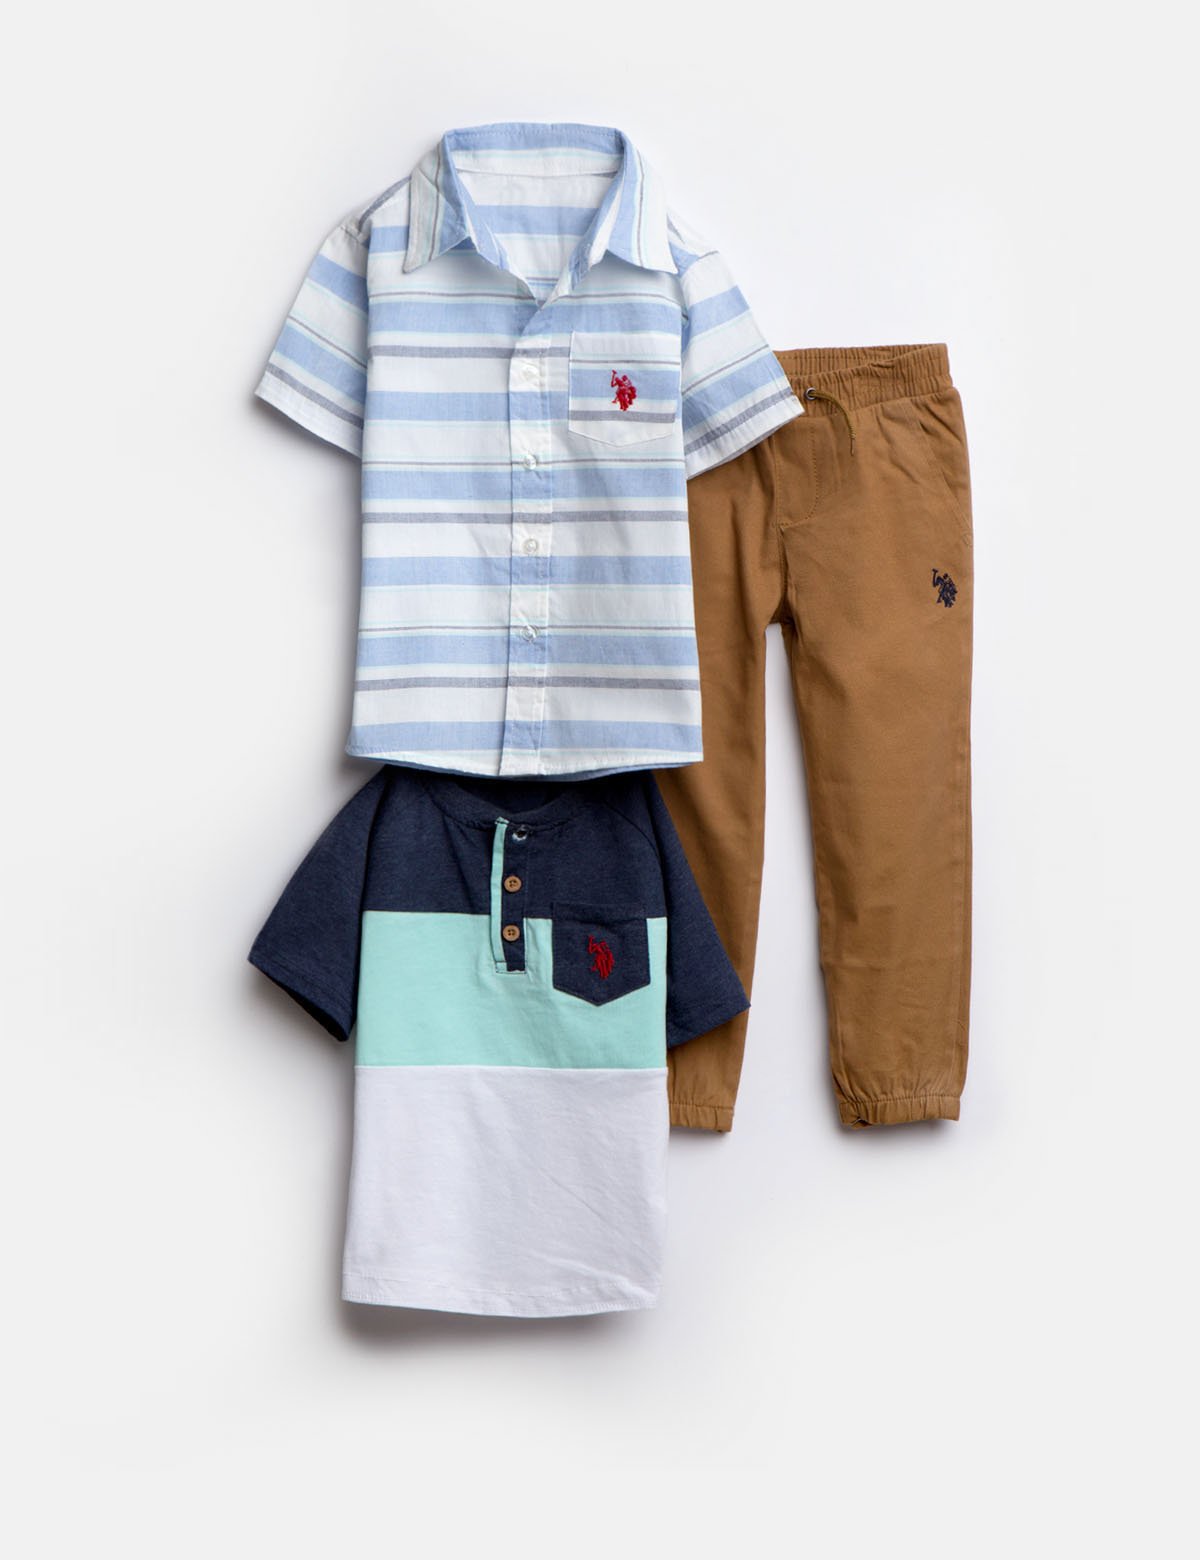 polo outfits for babies